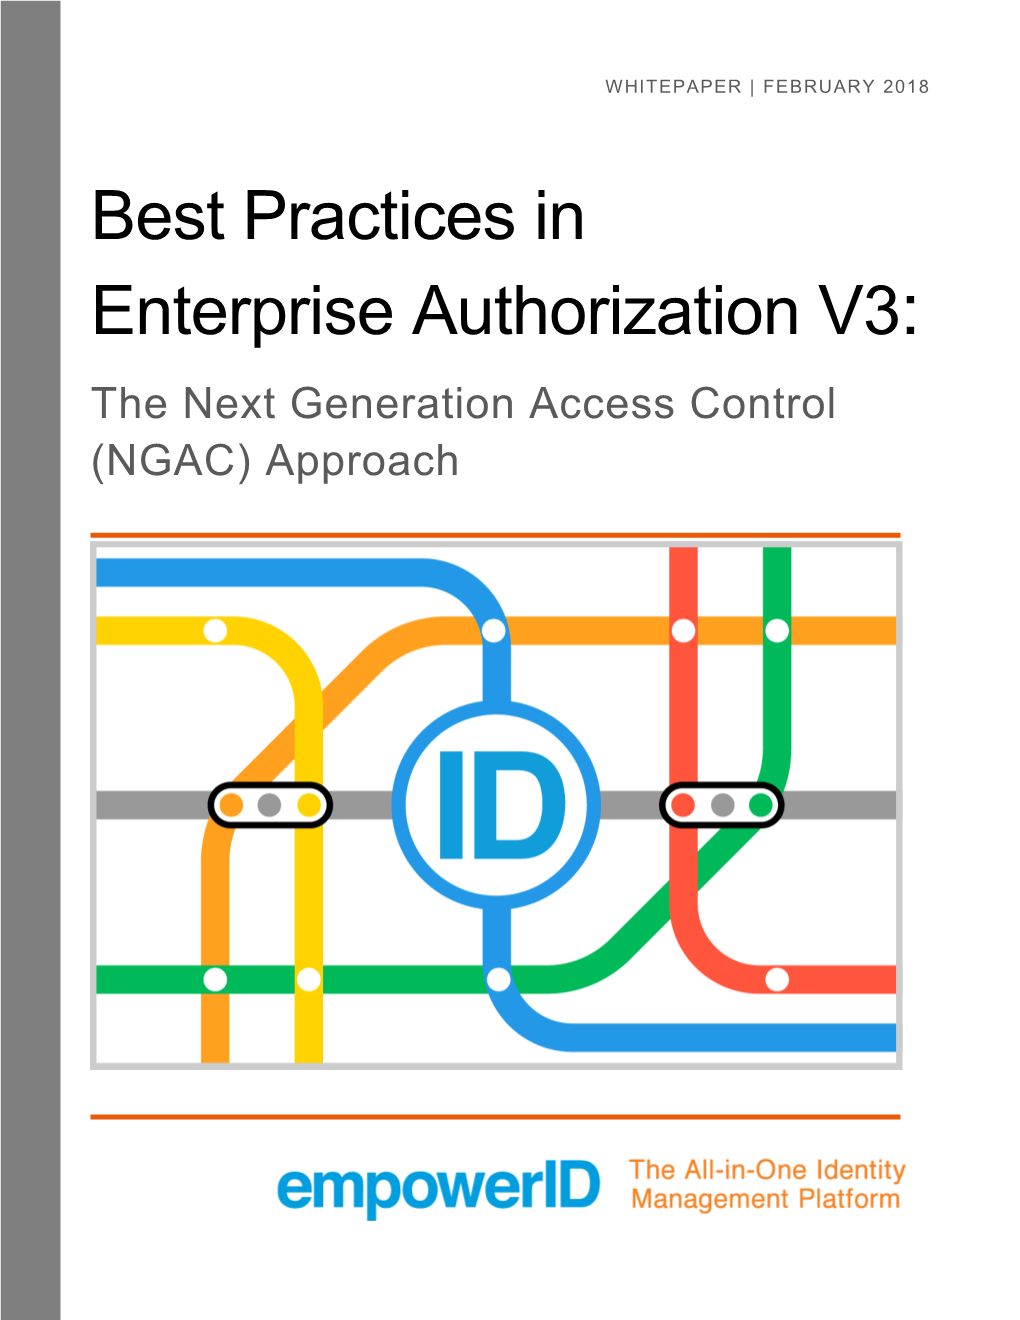 Best Practices in Enterprise Authorization V3: the Next Generation Access Control (NGAC) Approach